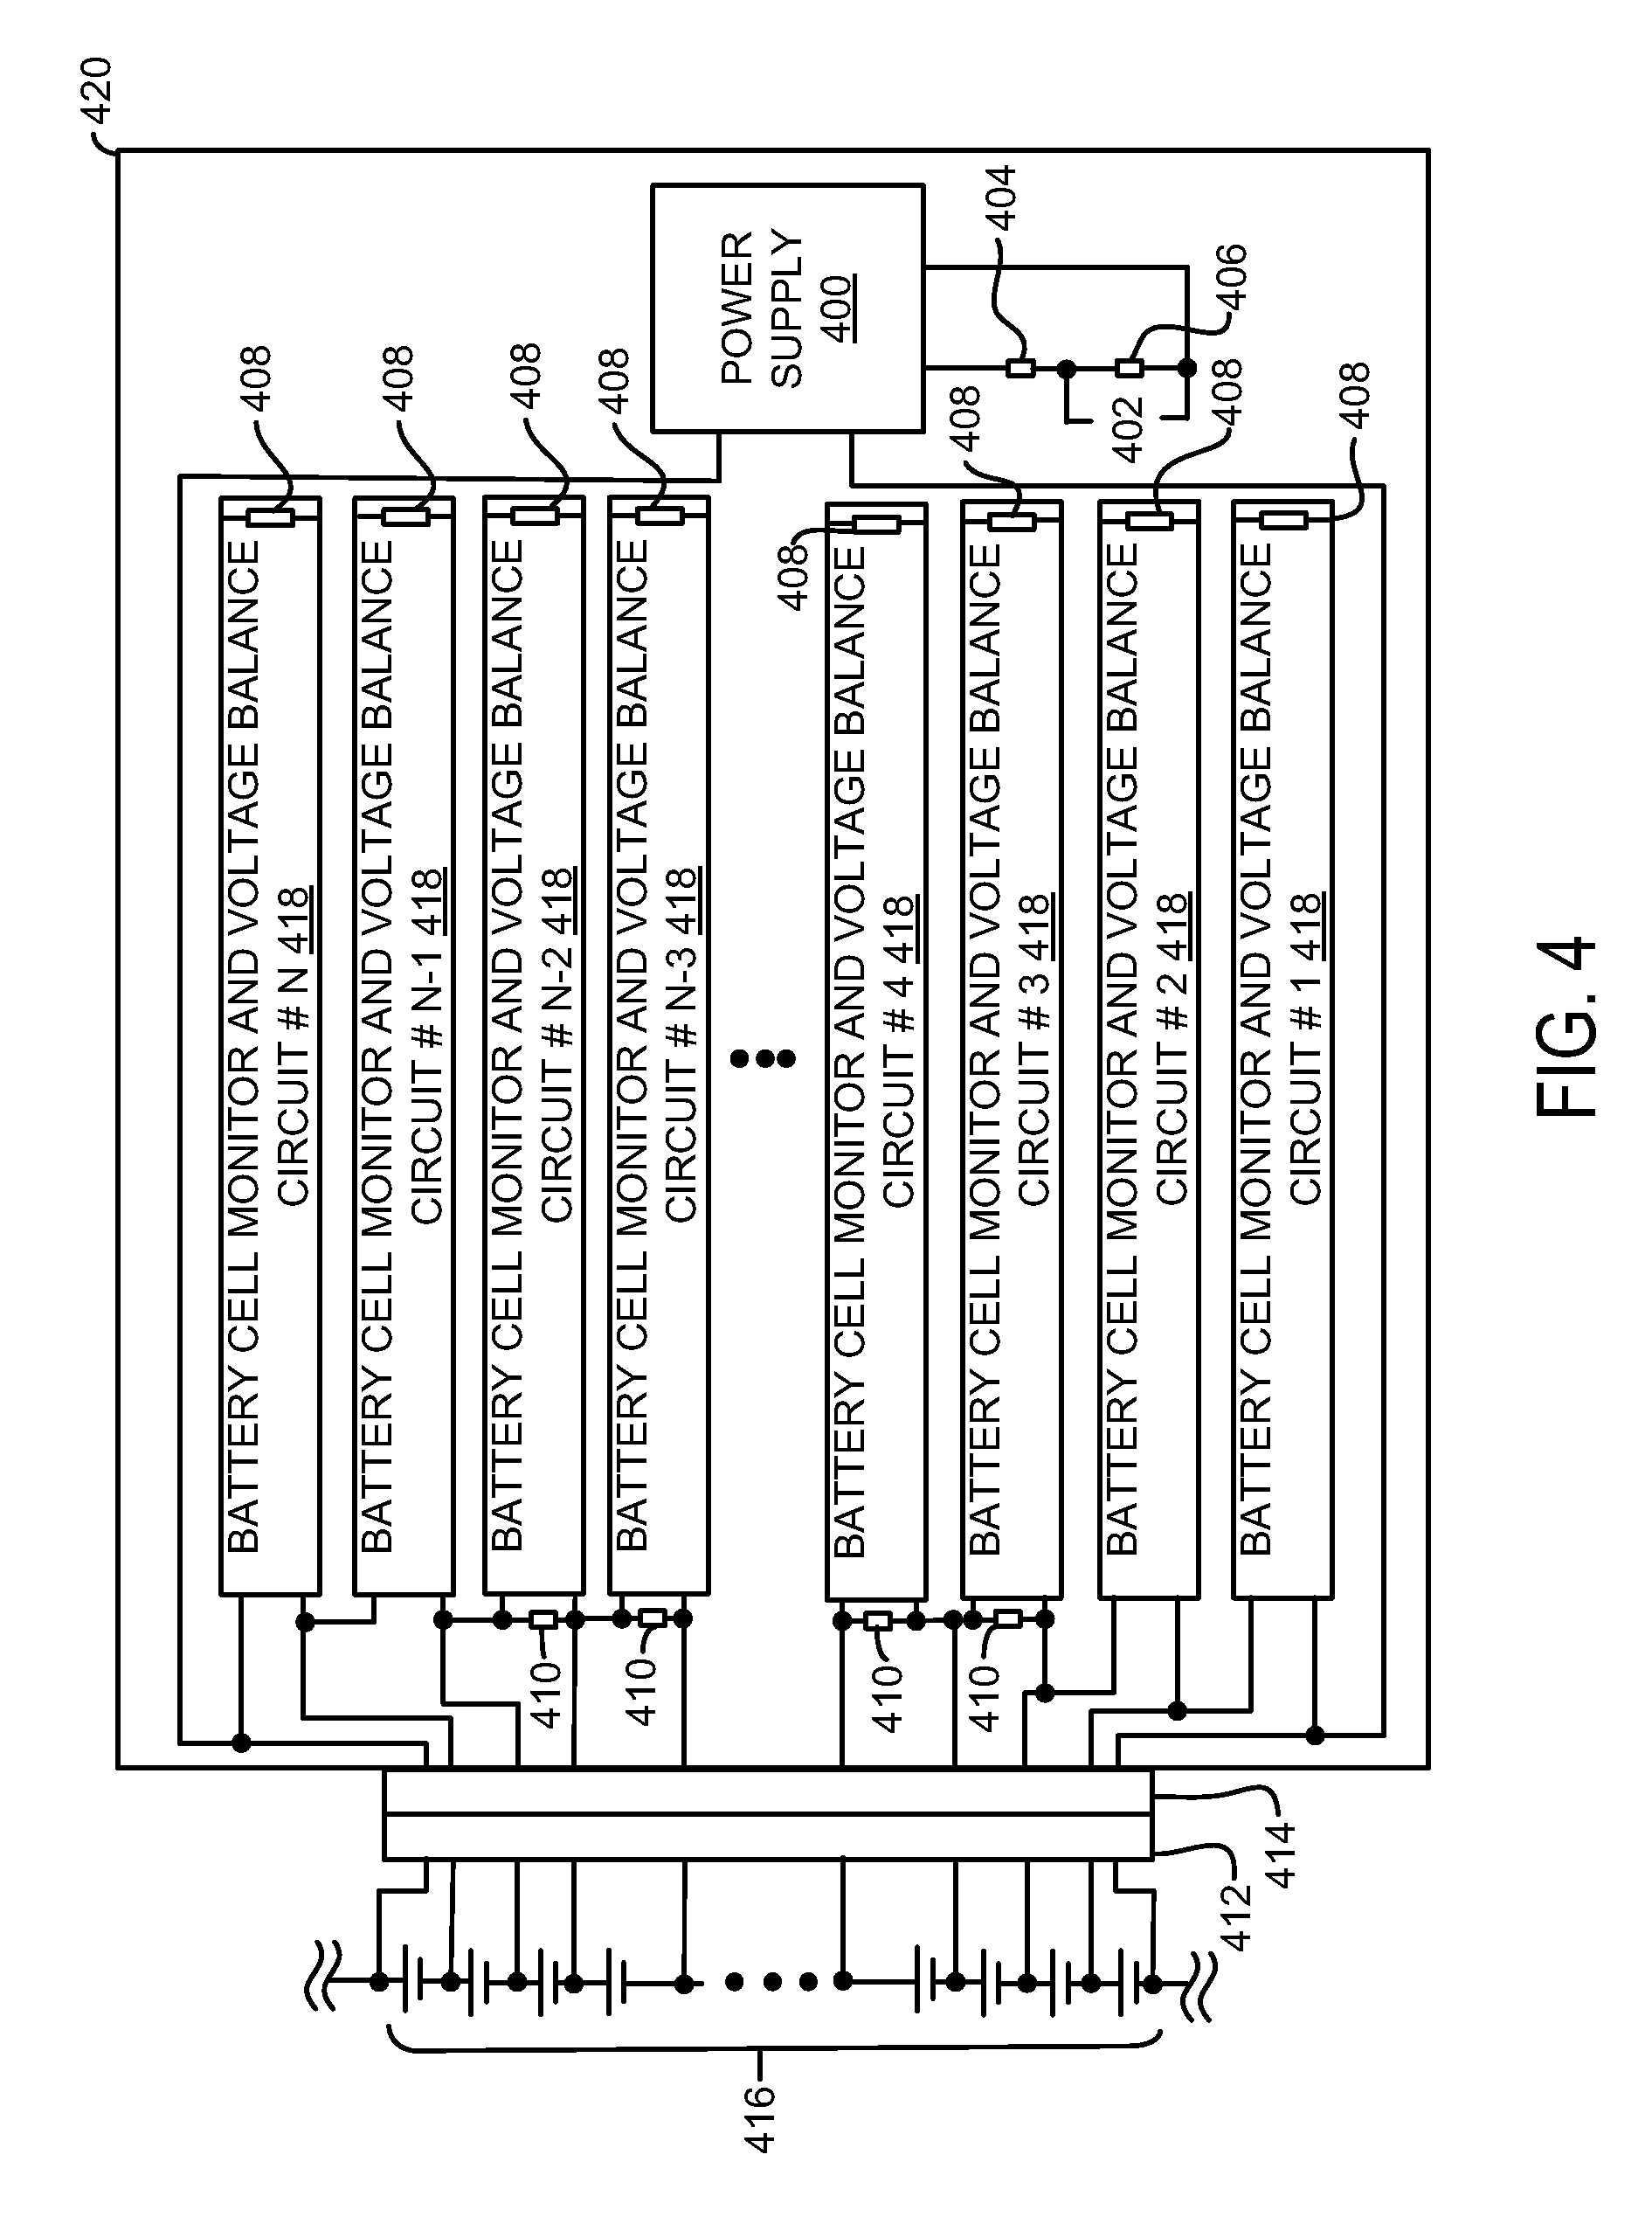 System and Method for Monitoring and Balancing Voltage of Individual Battery Cells within a Battery Pack